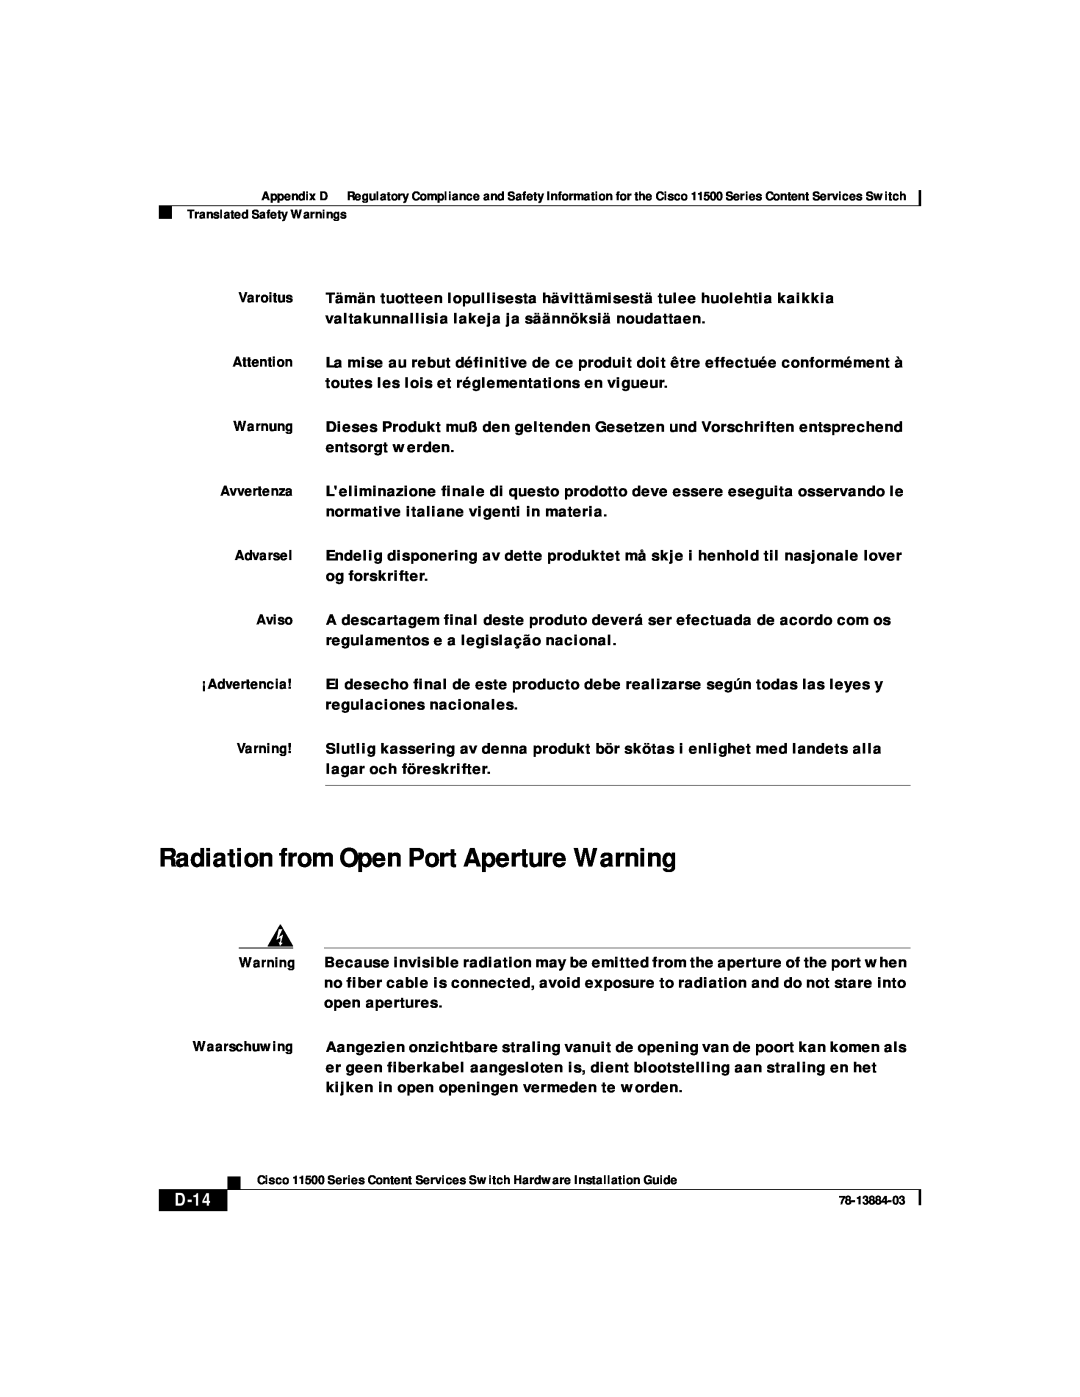 Cisco Systems 11500 Series manual Radiation from Open Port Aperture Warning, D-14 